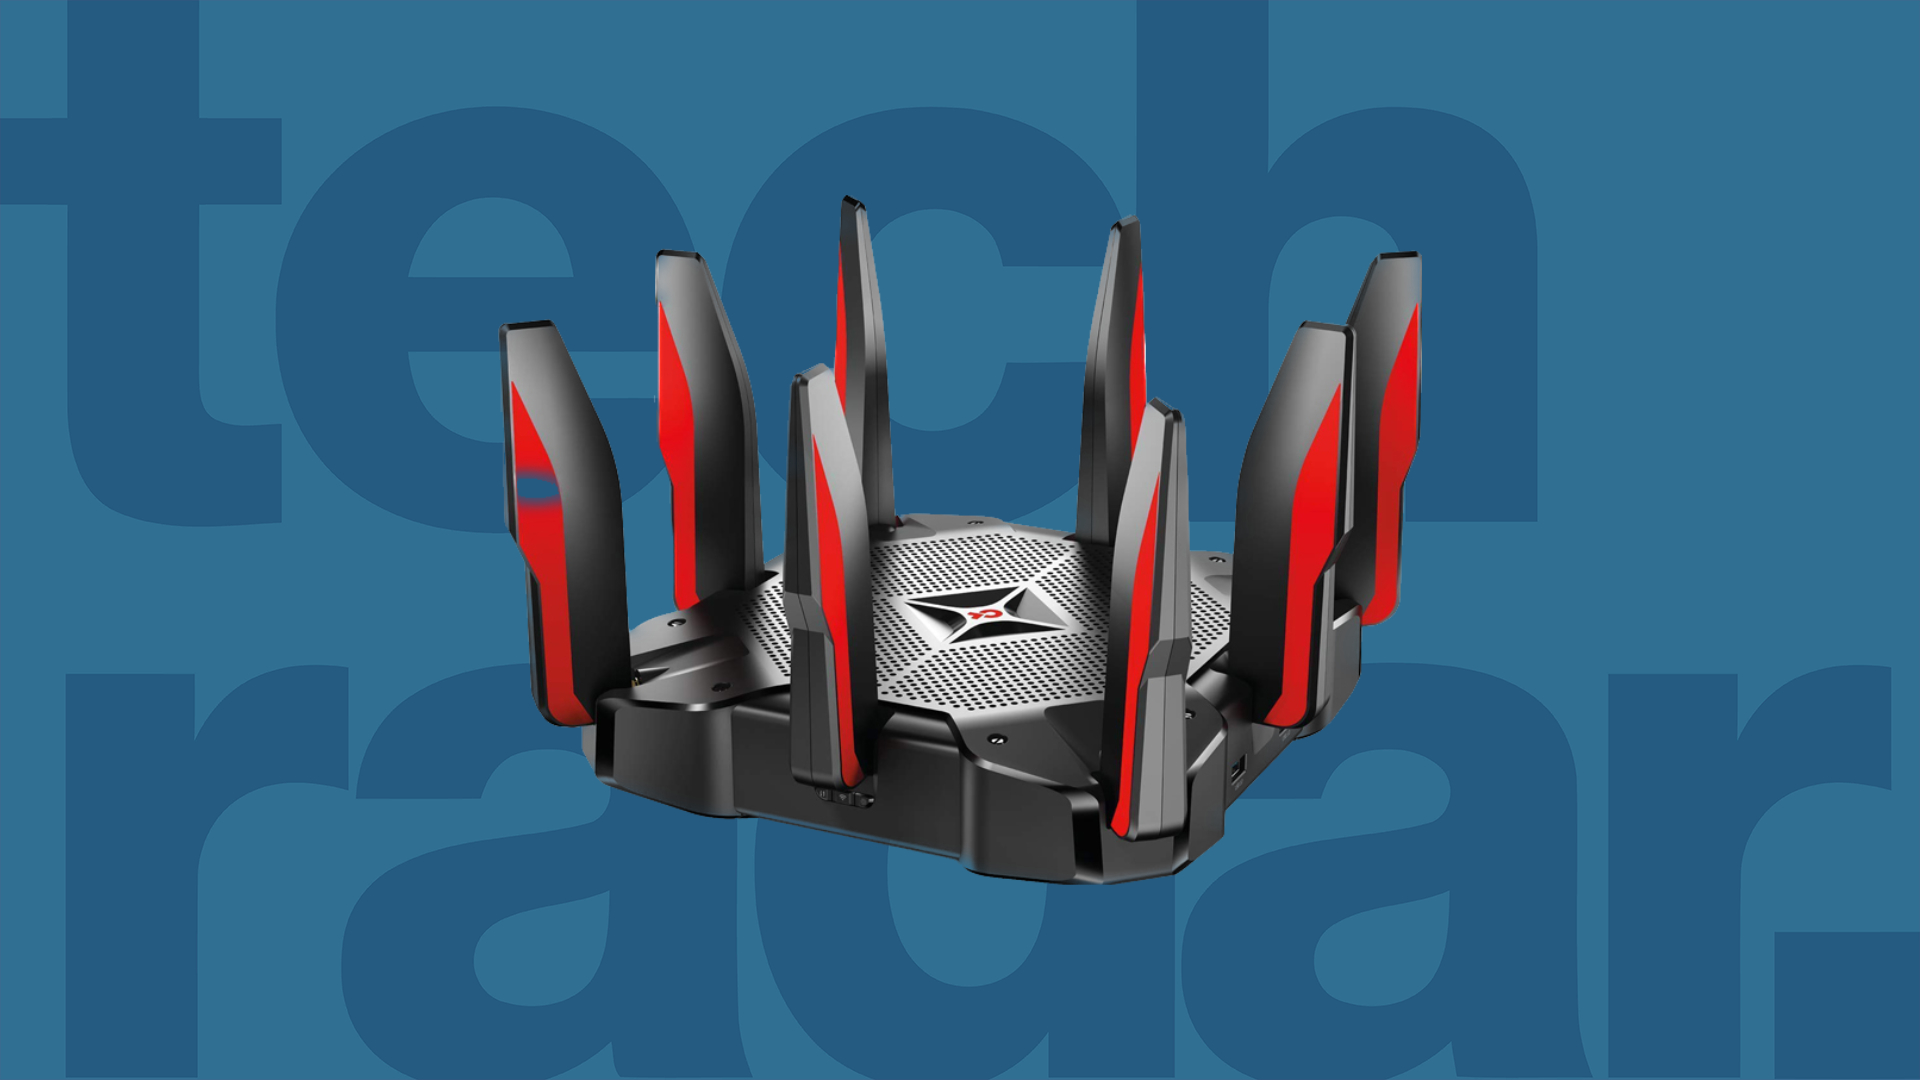 The 3 Best Wi-Fi Routers of 2024